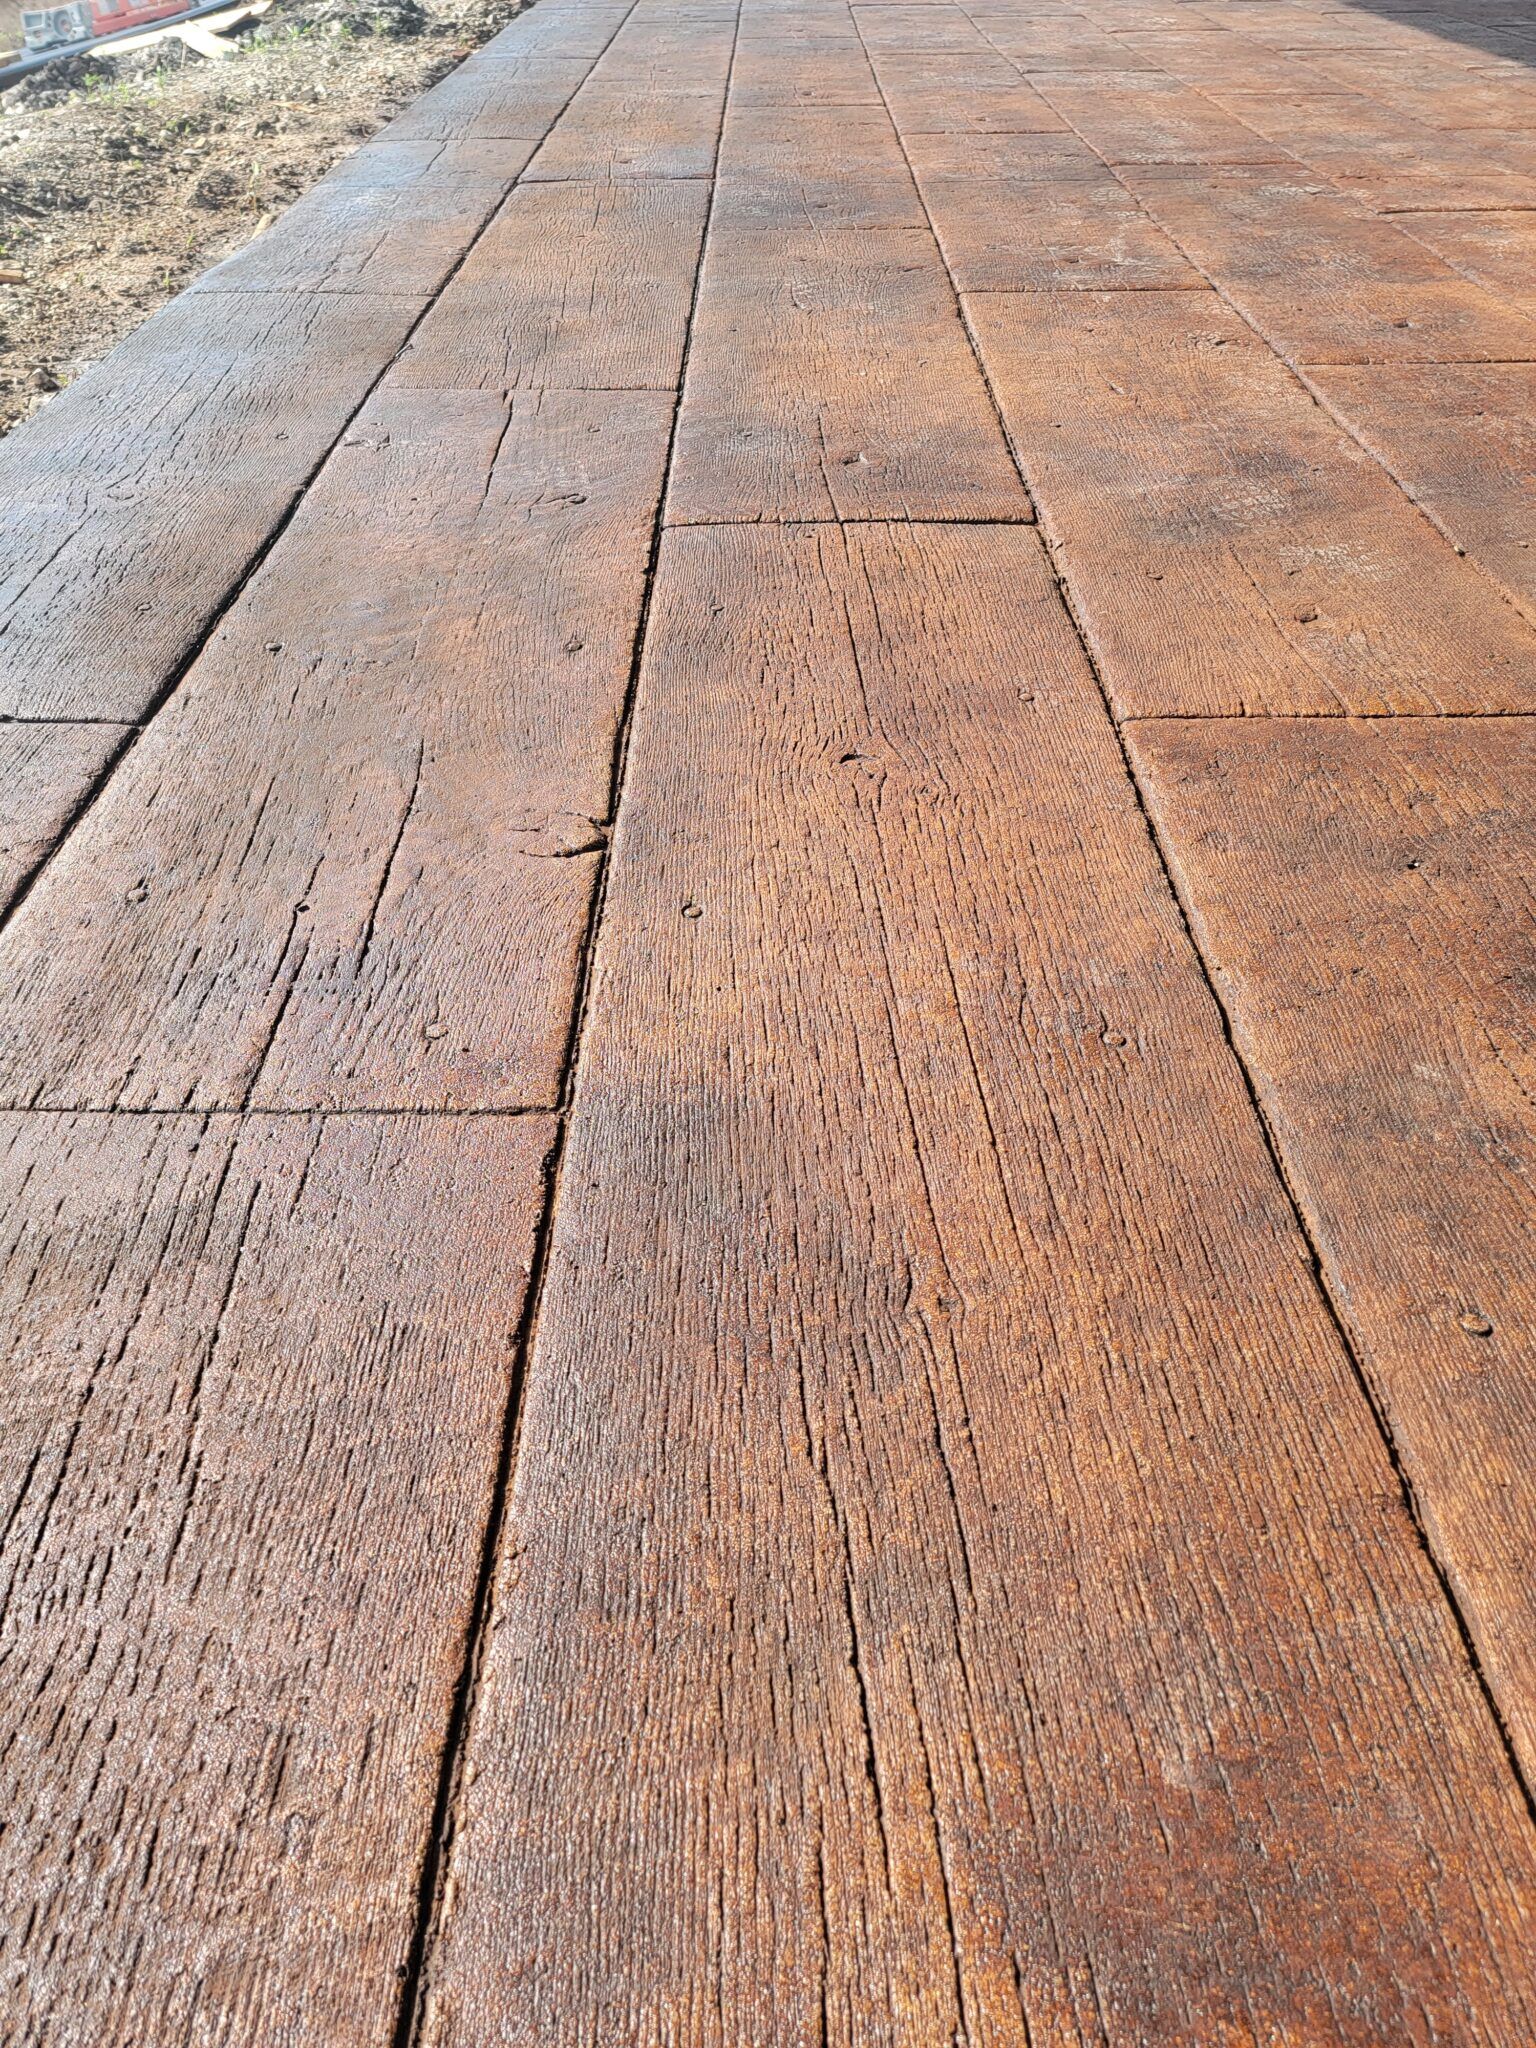 Stained concrete patio – the long-lasting
one